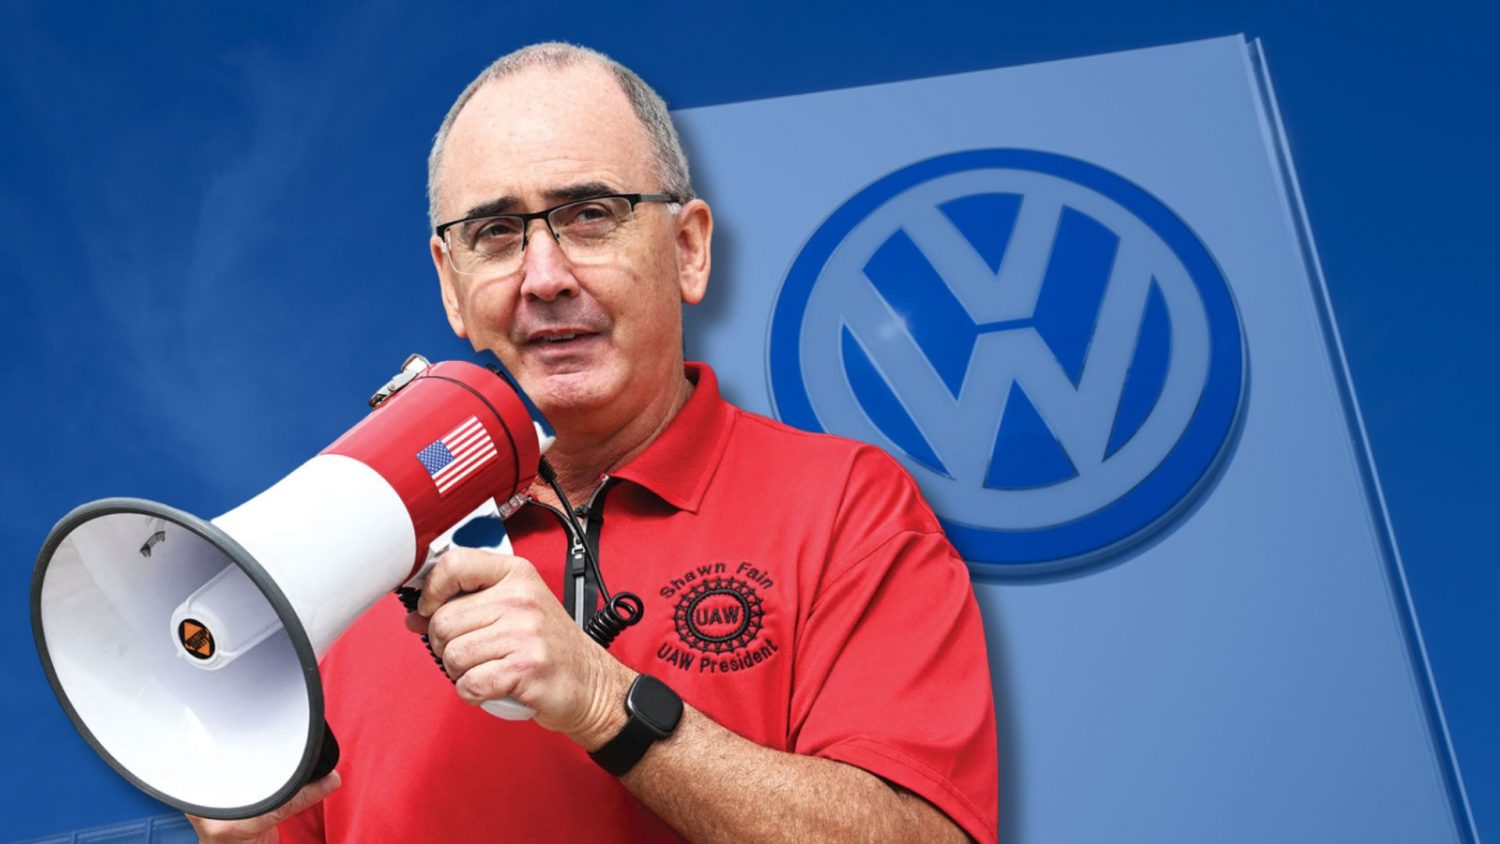 Governors from southern states are urging workers to not join unions as the NLRB oversees voting at Volkswagen's Tennessee plant.